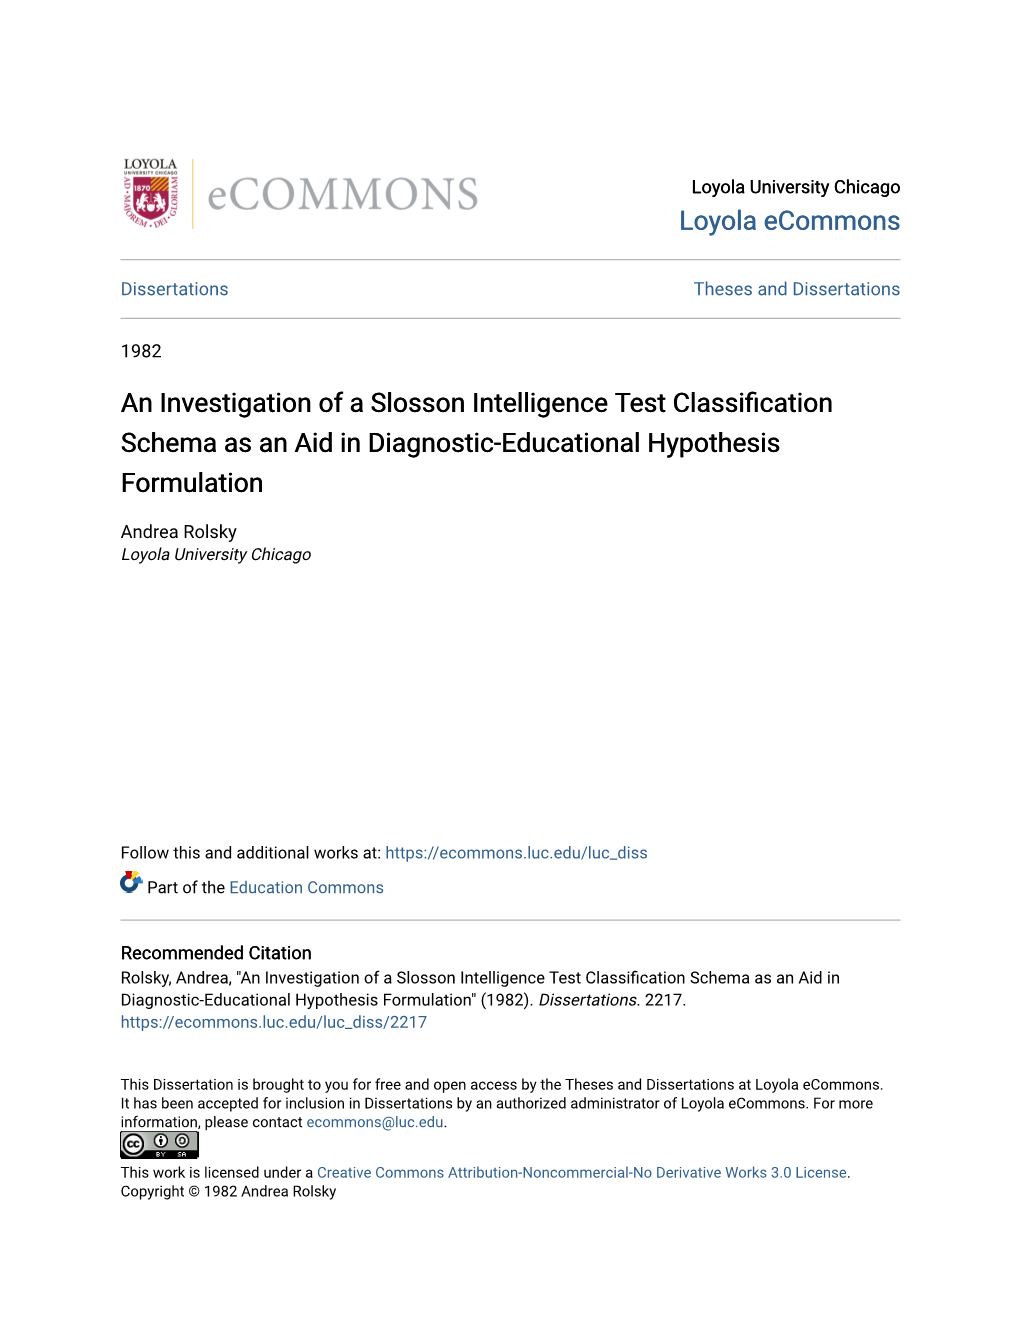 An Investigation of a Slosson Intelligence Test Classification Schema As an Aid in Diagnostic-Educational Hypothesis Formulation